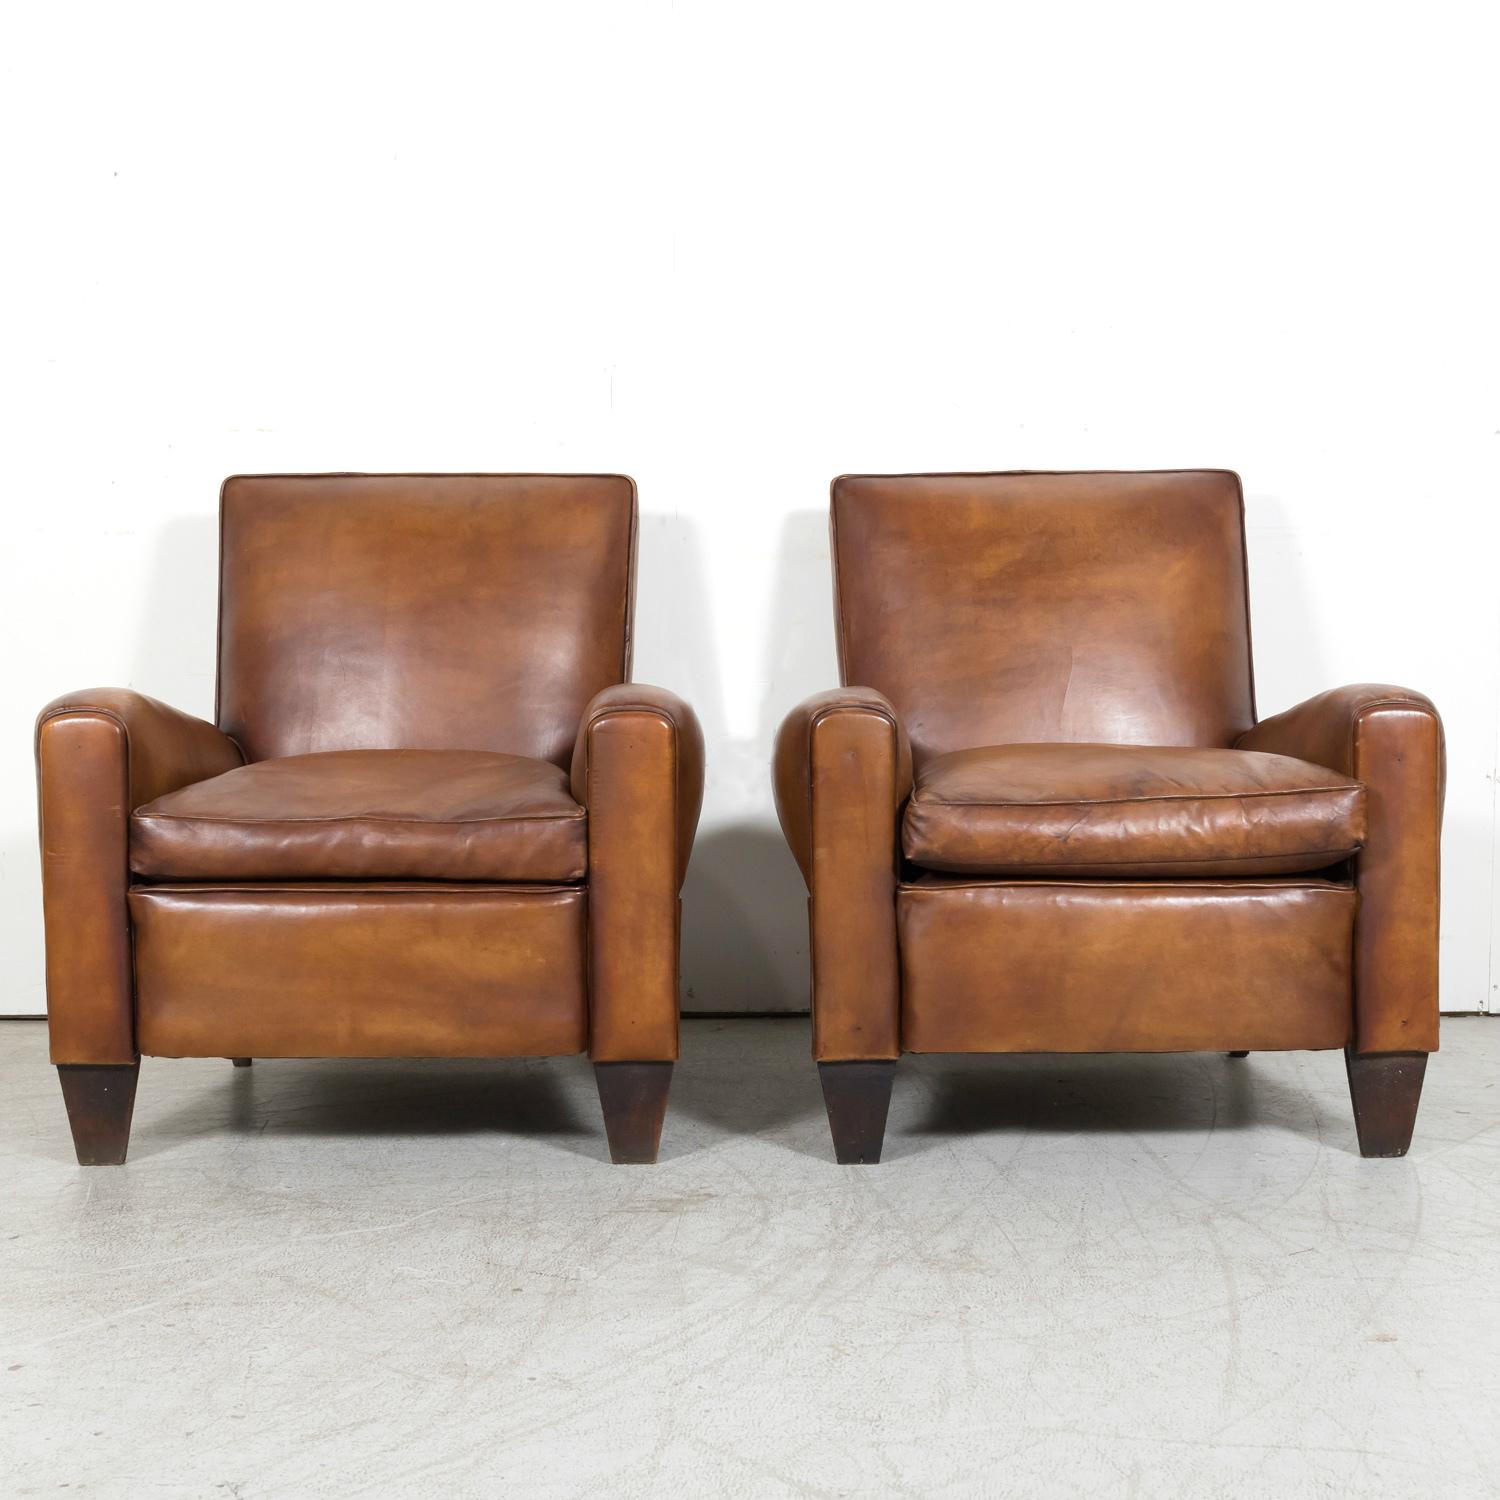 A handsome pair of French Art Deco period cognac leather club chairs, circa 1930s. Handcrafted in Paris, this classic pair of club chairs showcases superb craftsmanship and attention to detail, capturing the essence of Art Deco style with their